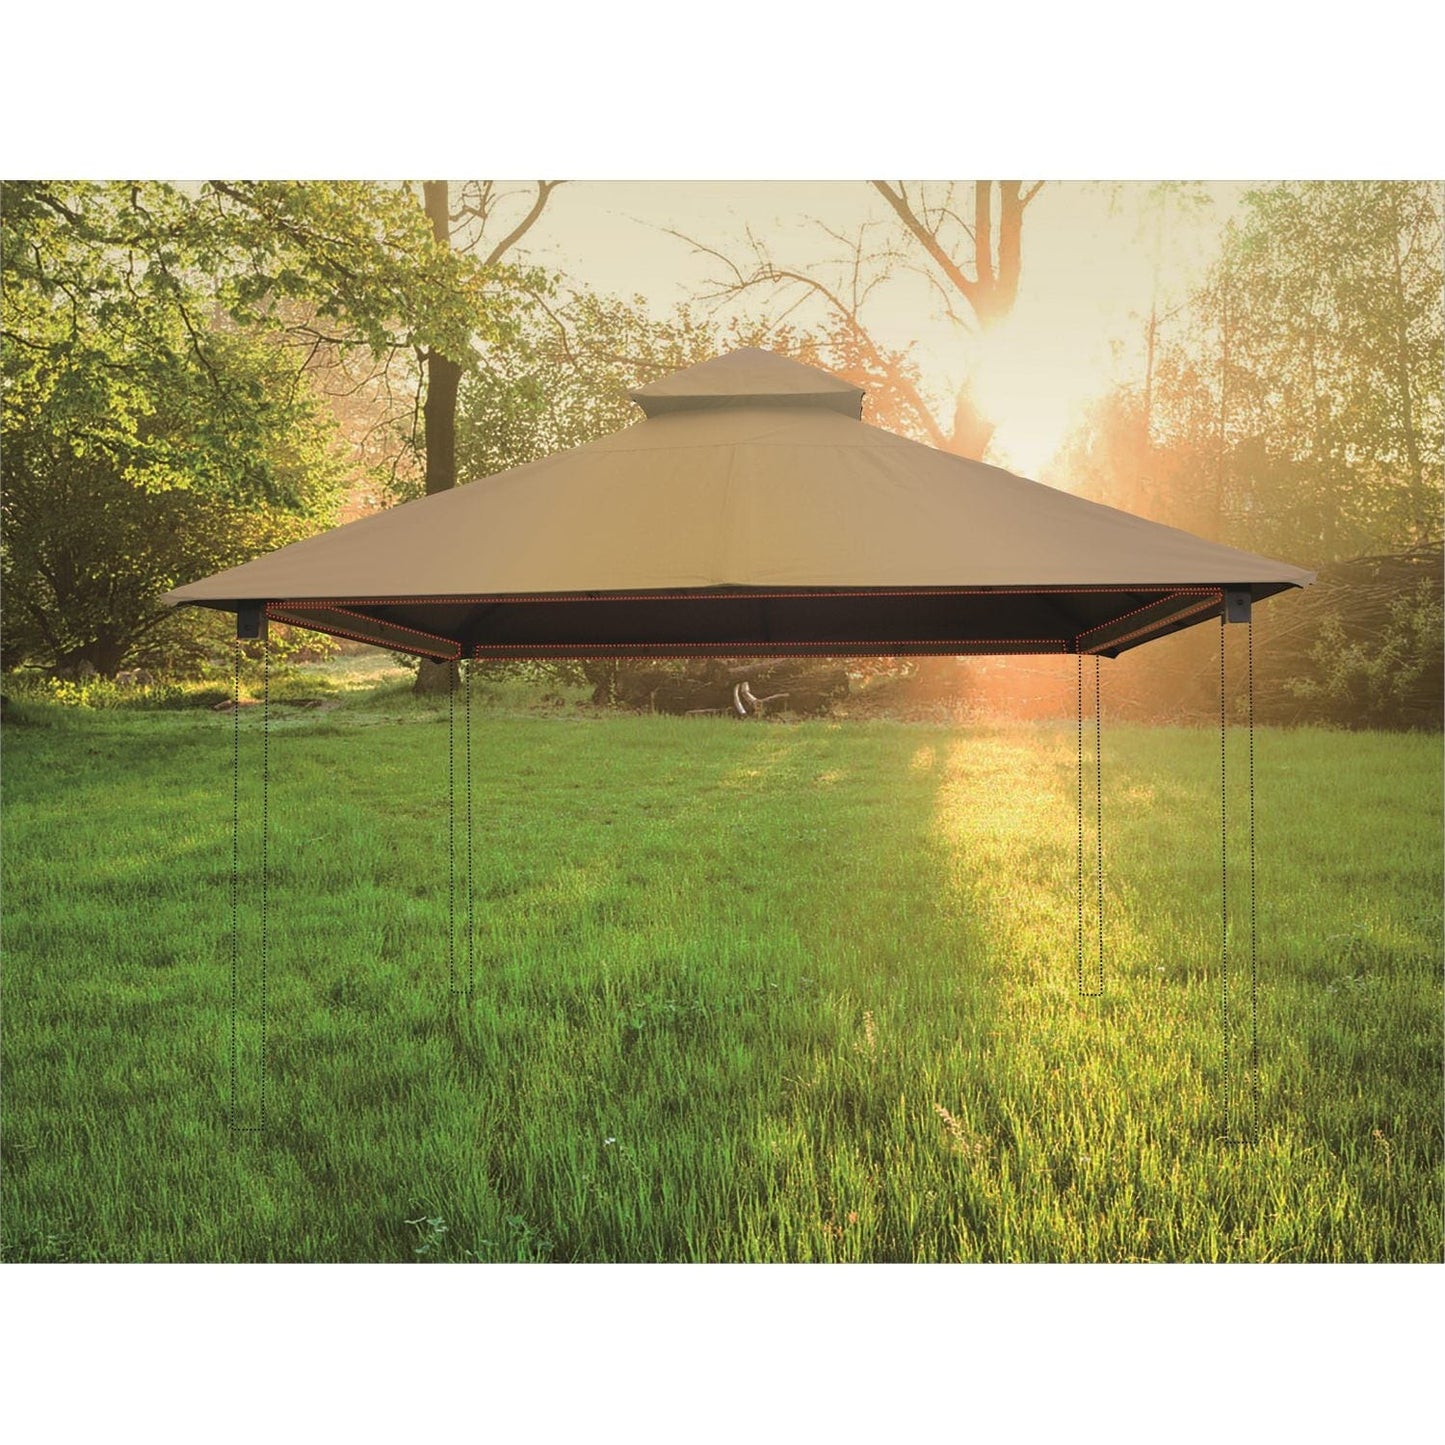 Riverstone Industries Soft Top Gazebos Riverstone | ACACIA Gazebo Roof Framing and Mounting Kit With OutDURA Canopy - Khaki